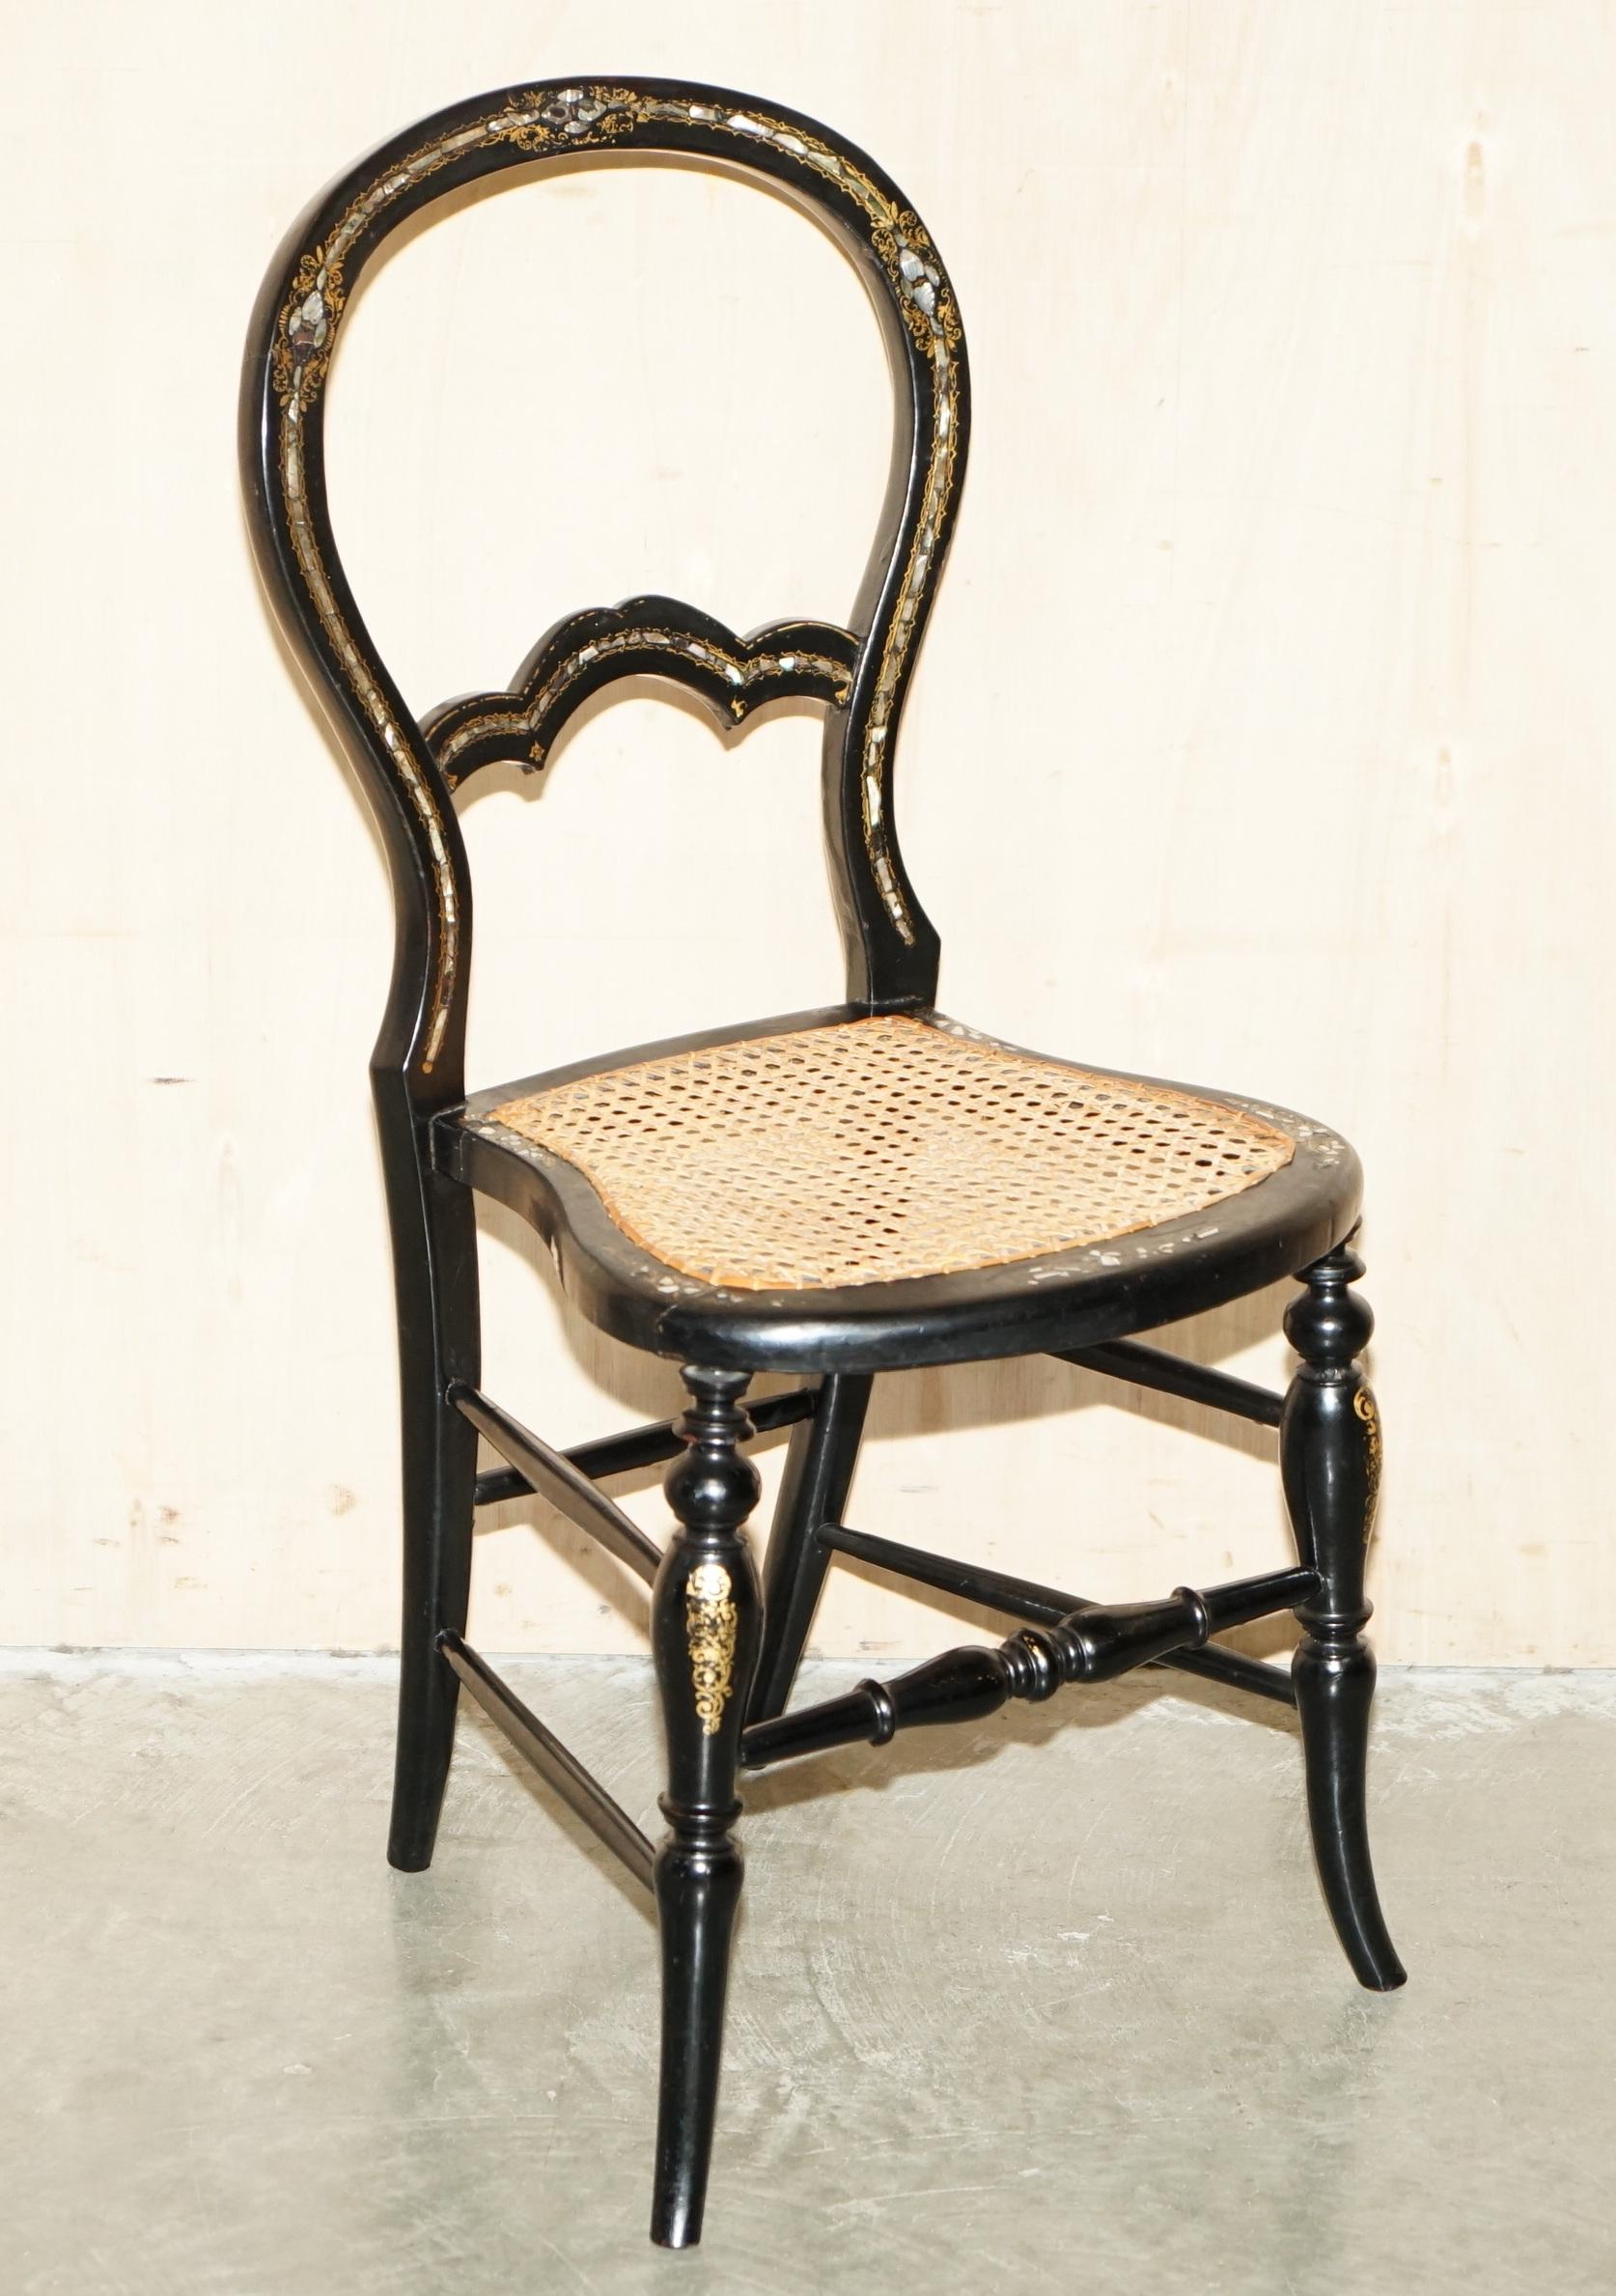 Royal House Antiques

Royal House Antiques is delighted to offer for sale this lovely suite of four original circa 1810-1820 Regency bergere ebonised with mother of pearl inlay side chairs

Please note the delivery fee listed is just a guide, it